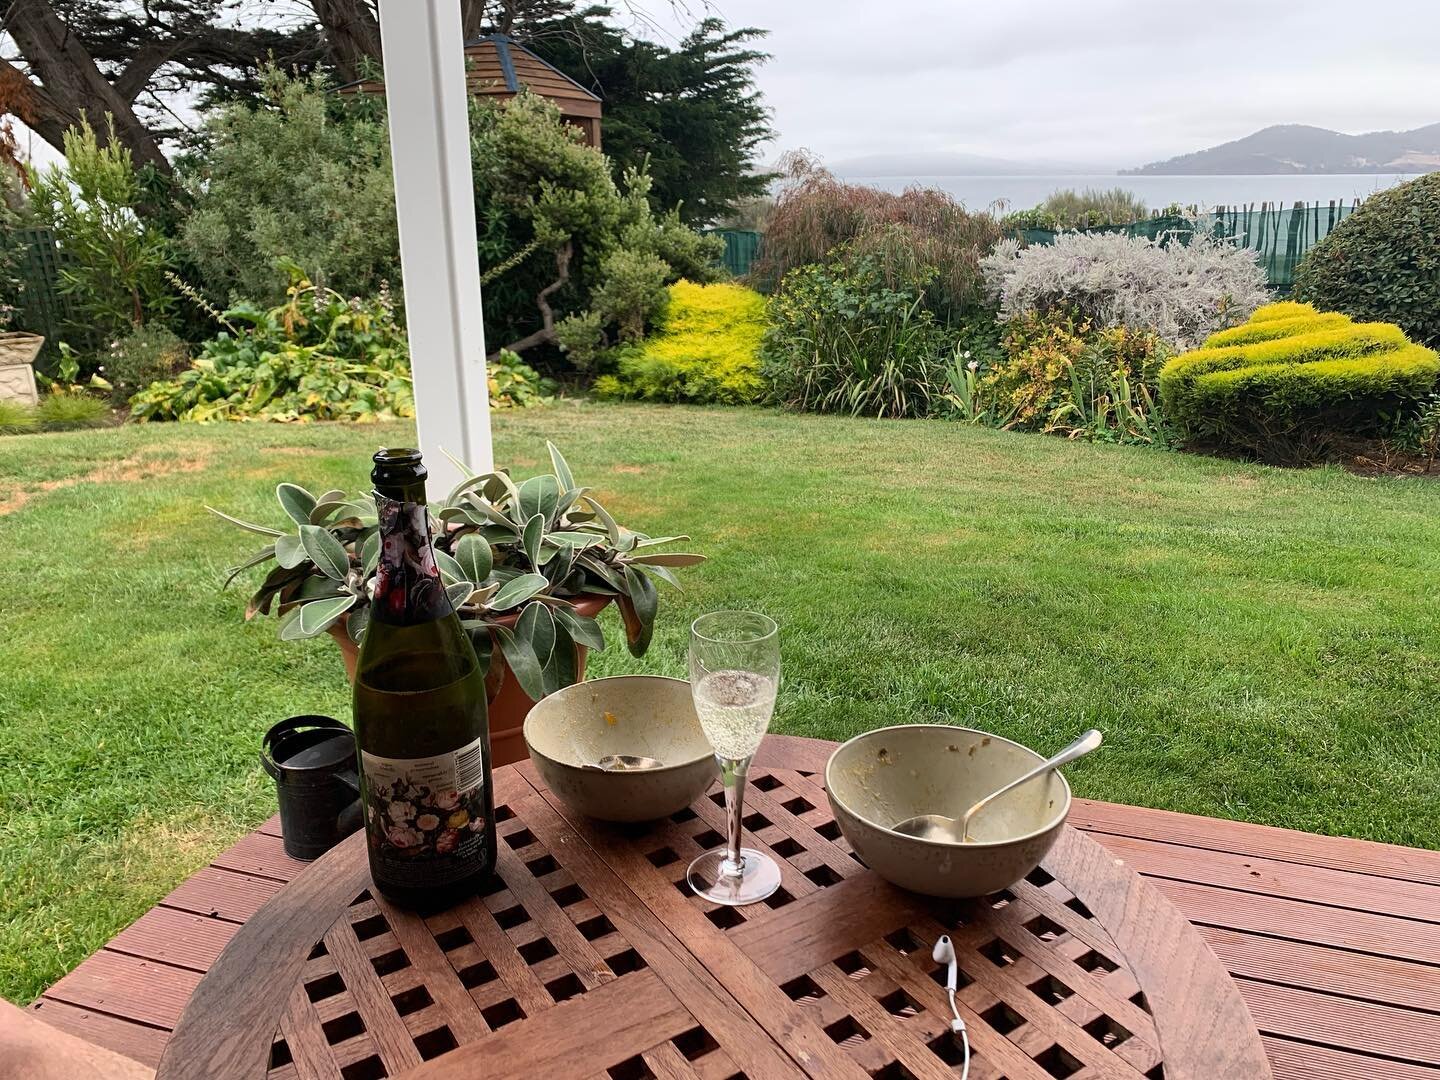 So much to love about this AirBnb in South Arm. Our second time here. Complimentary champagne to celebrate a special birthday, home cooked soup made from fish caught off Bruny. Best of all is this little table on the deck, where I can sit and write w